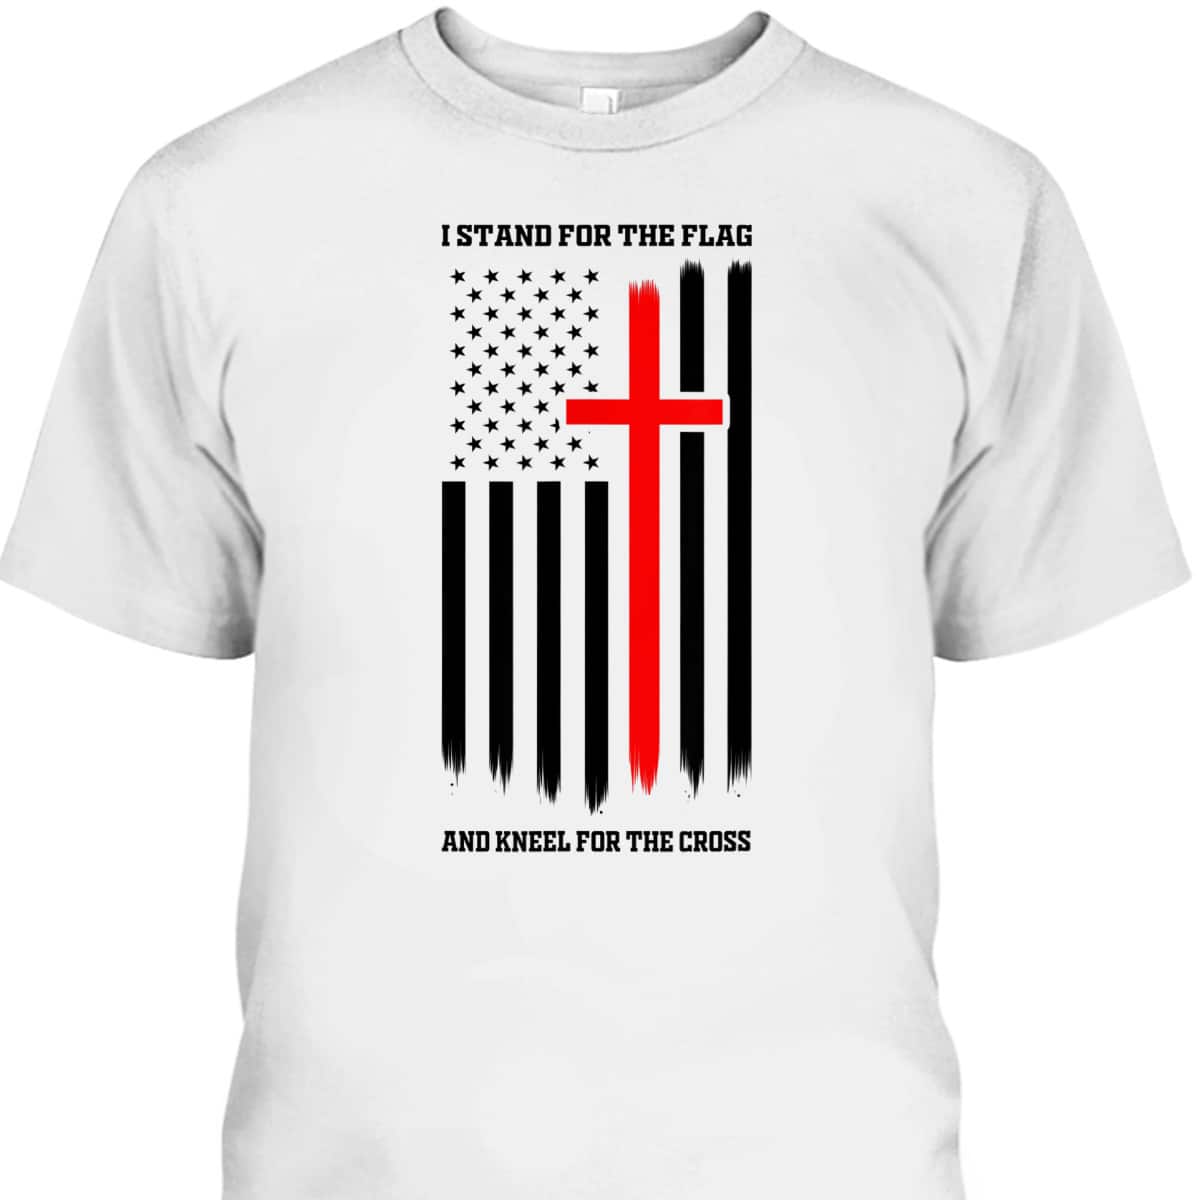 Veteran's Day T-Shirt I Stand For The Flag And Kneel For The Cross